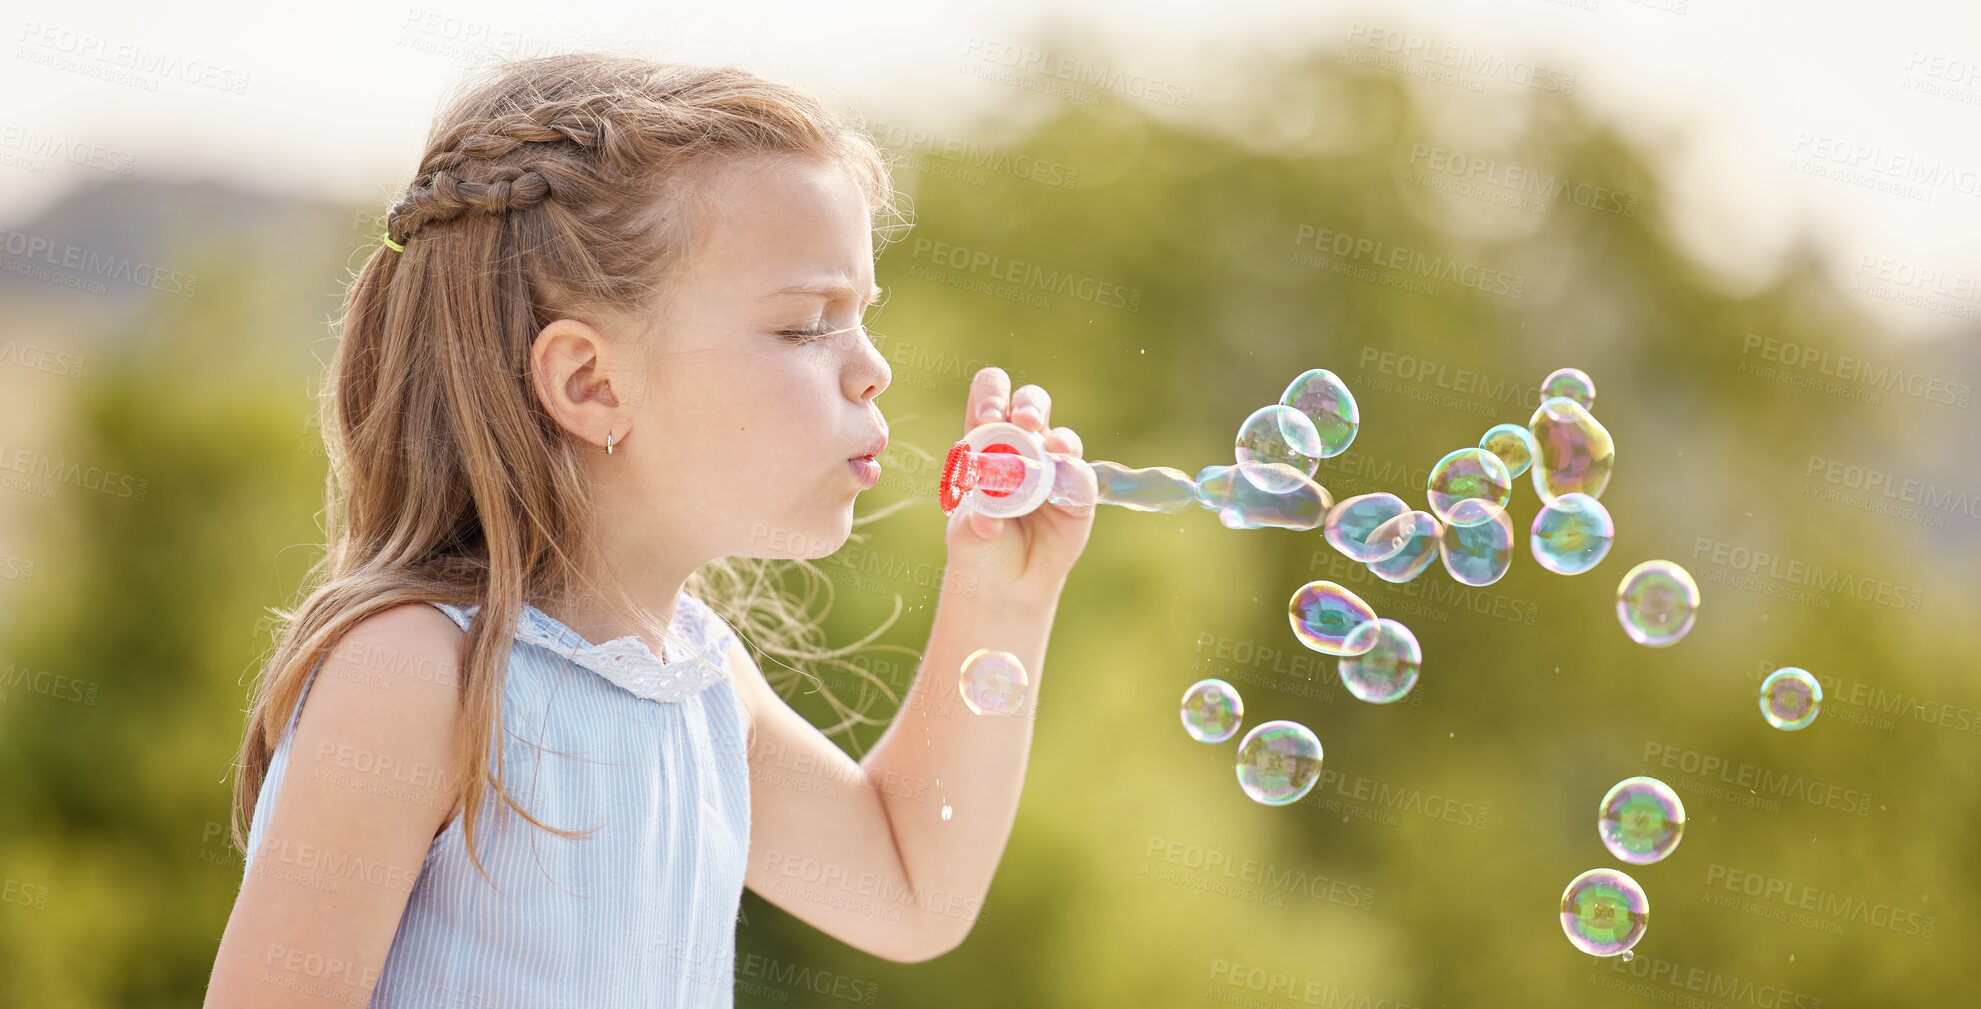 Buy stock photo Shot of a little girl blowing bubbles in a park